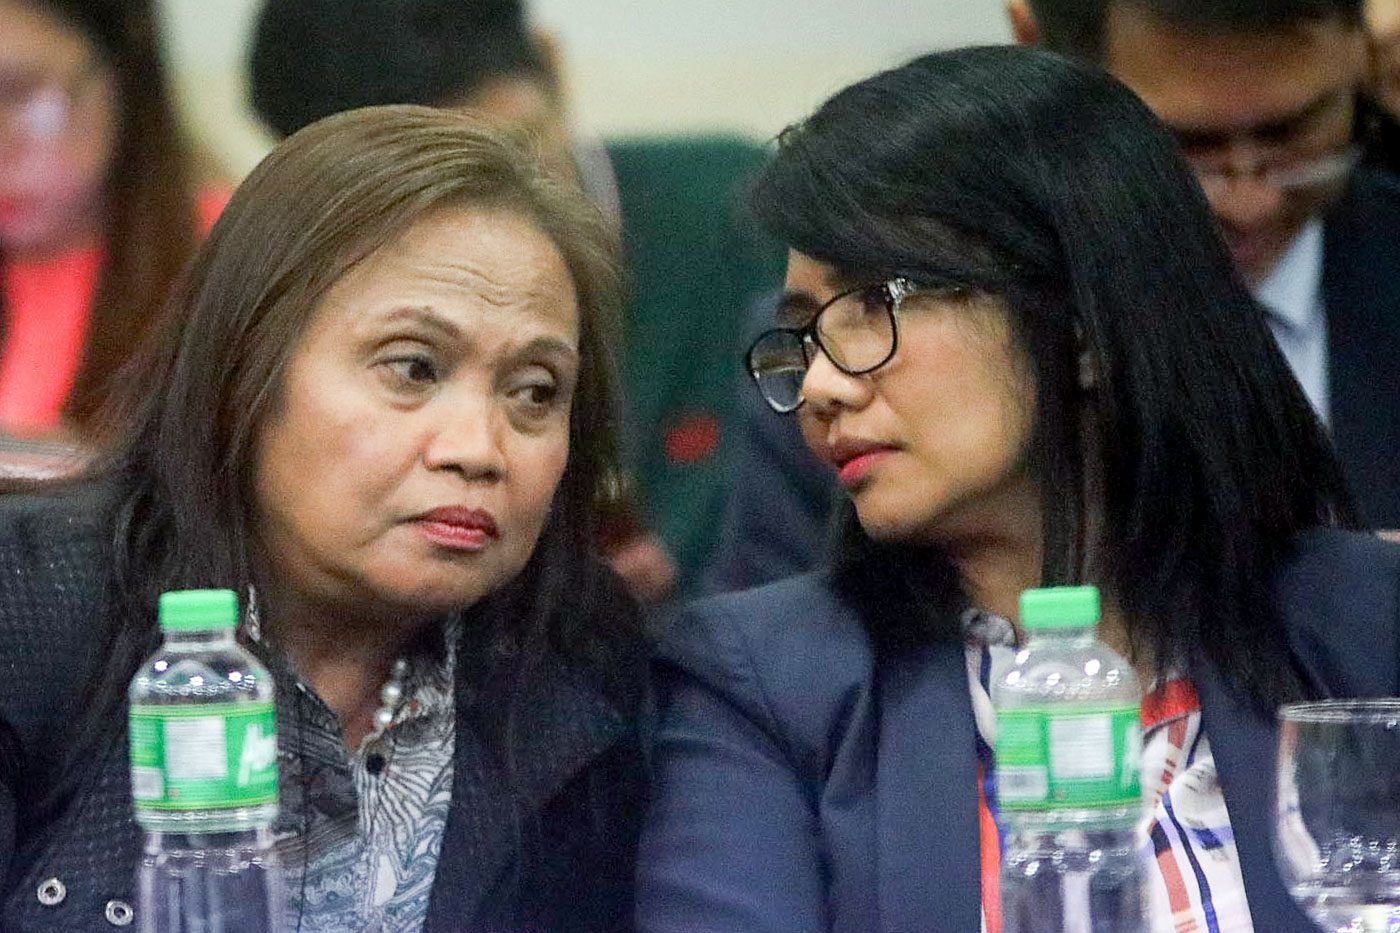 FORMER JBC EMPLOYEES. Resource persons Genuina C. Ranoy and Dulce Lizsa R. Sahagun during the committee on justice hearing. Photo by Darren Langit/Rappler 